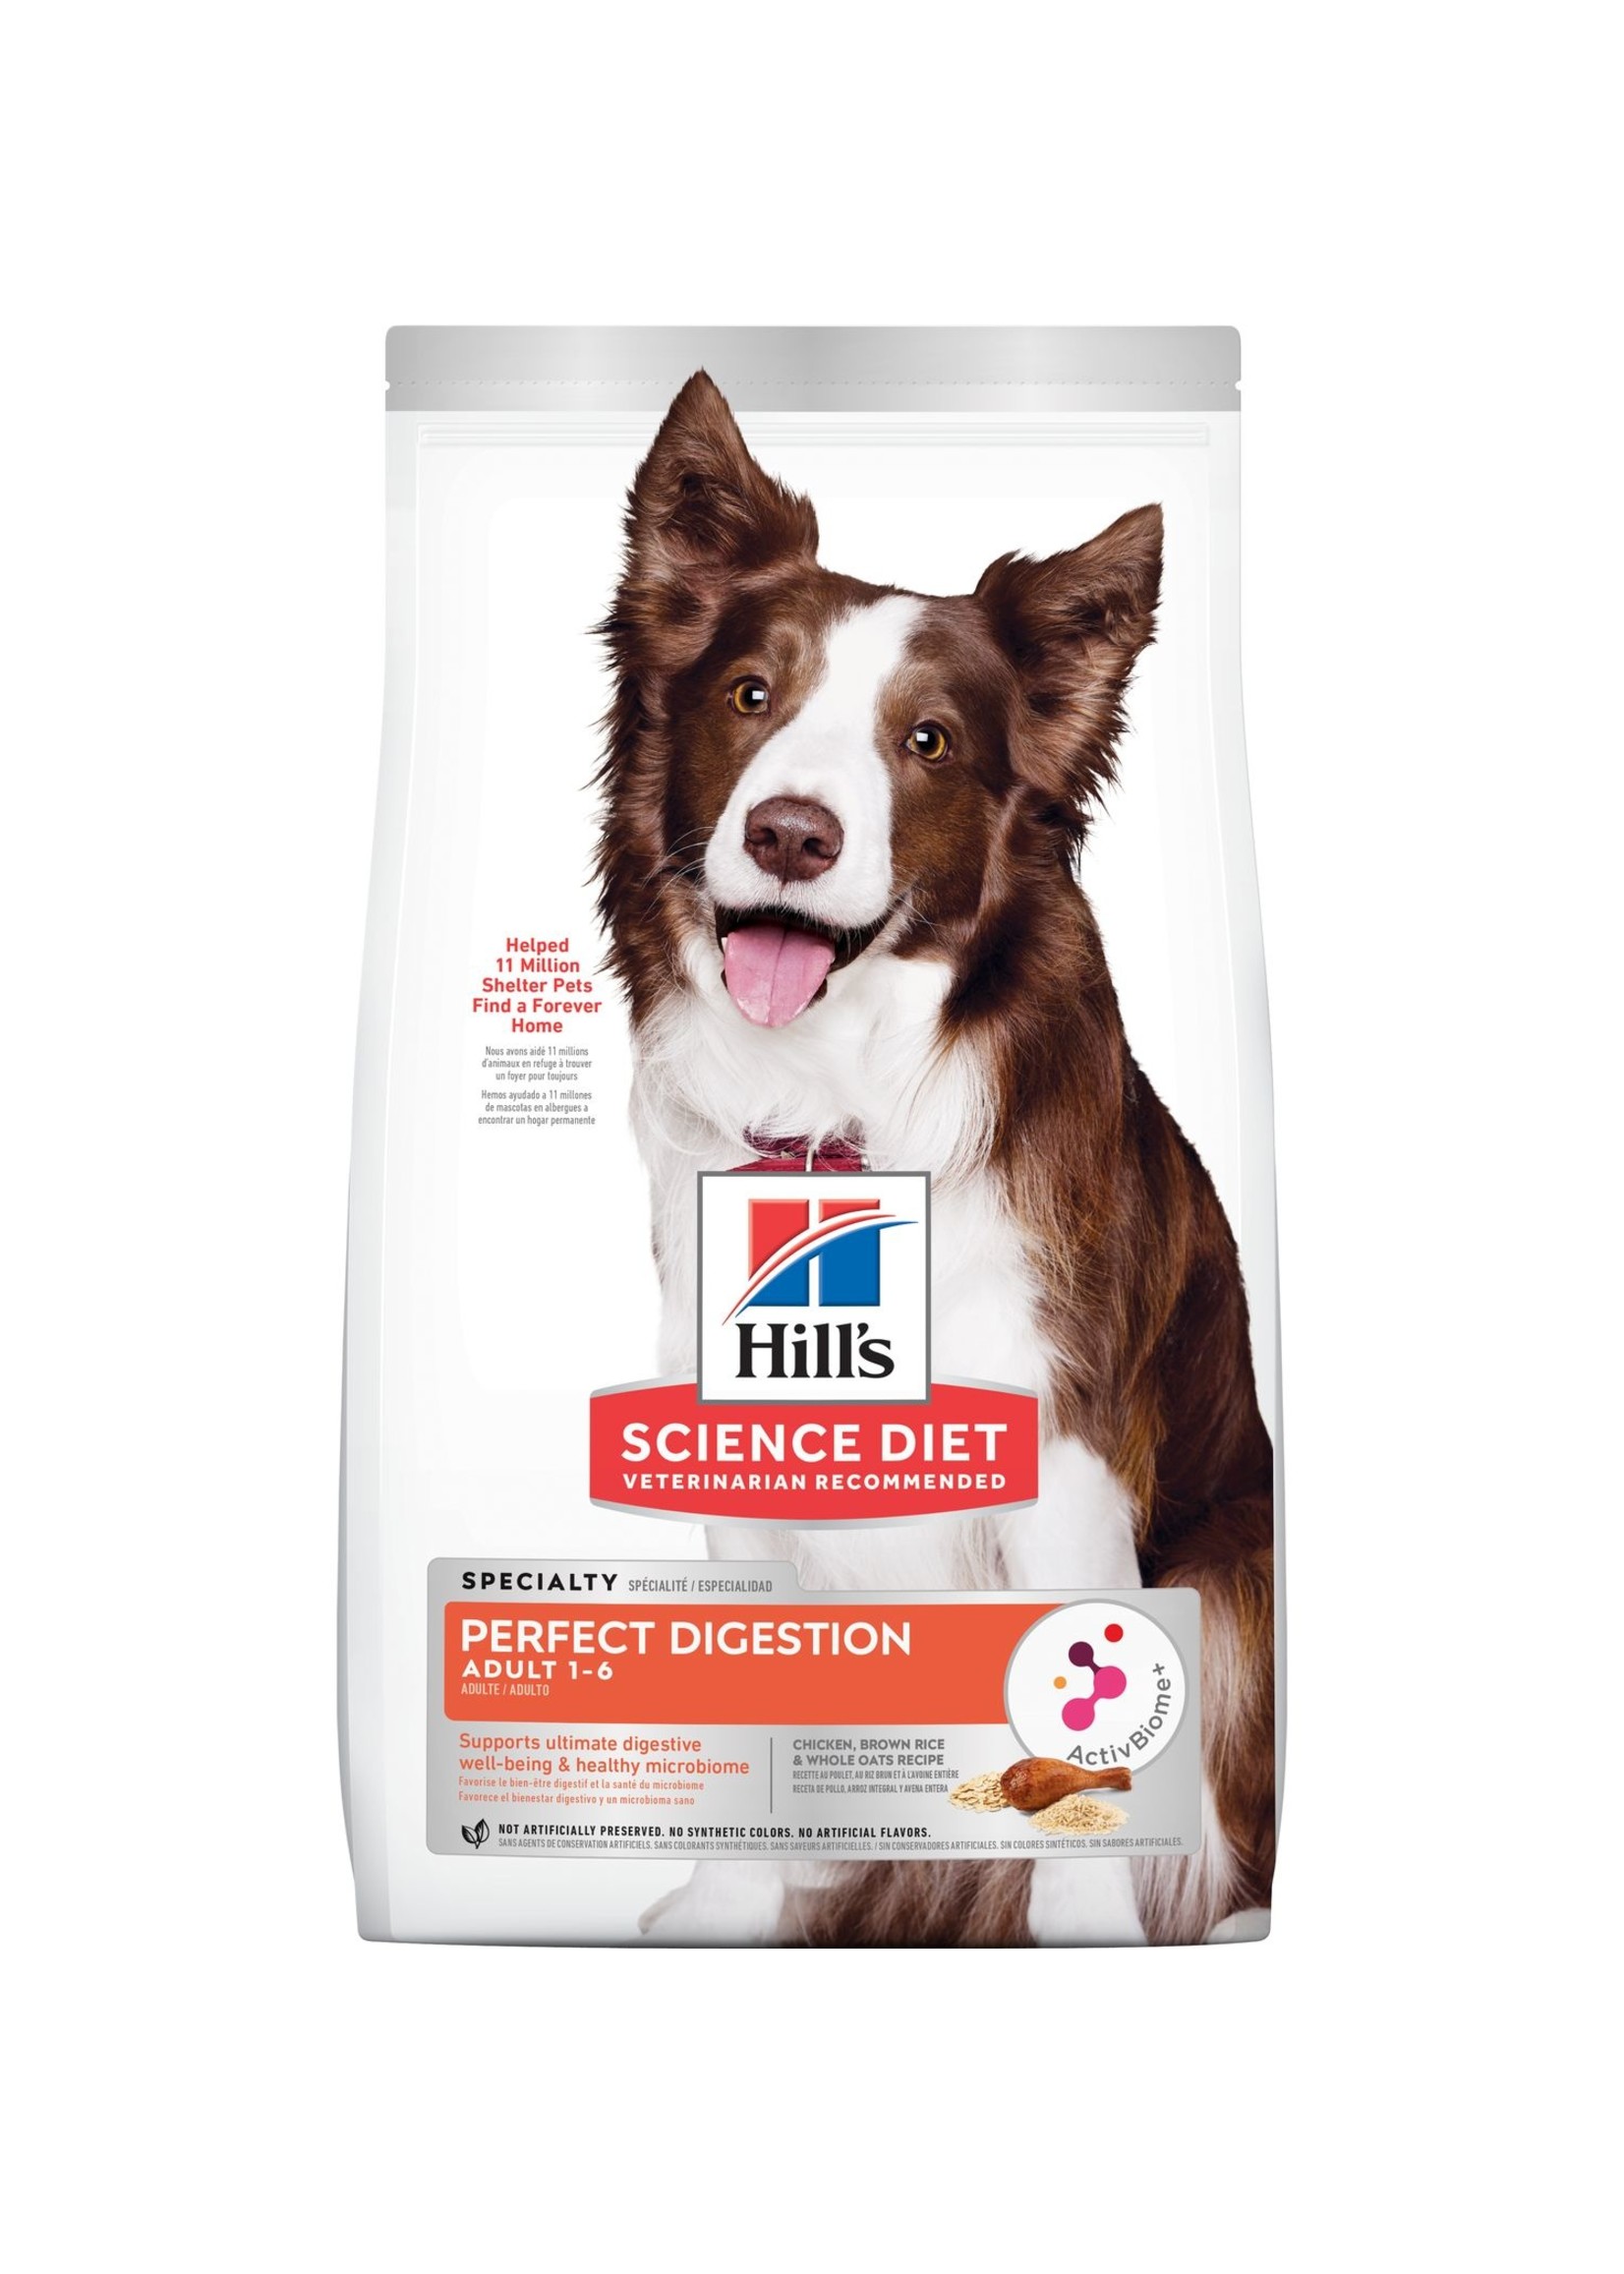 Hill's Science Diet Hill's Science Diet Adult Perfect Digestion, Chicken, Brown Rice, & Whole Oats